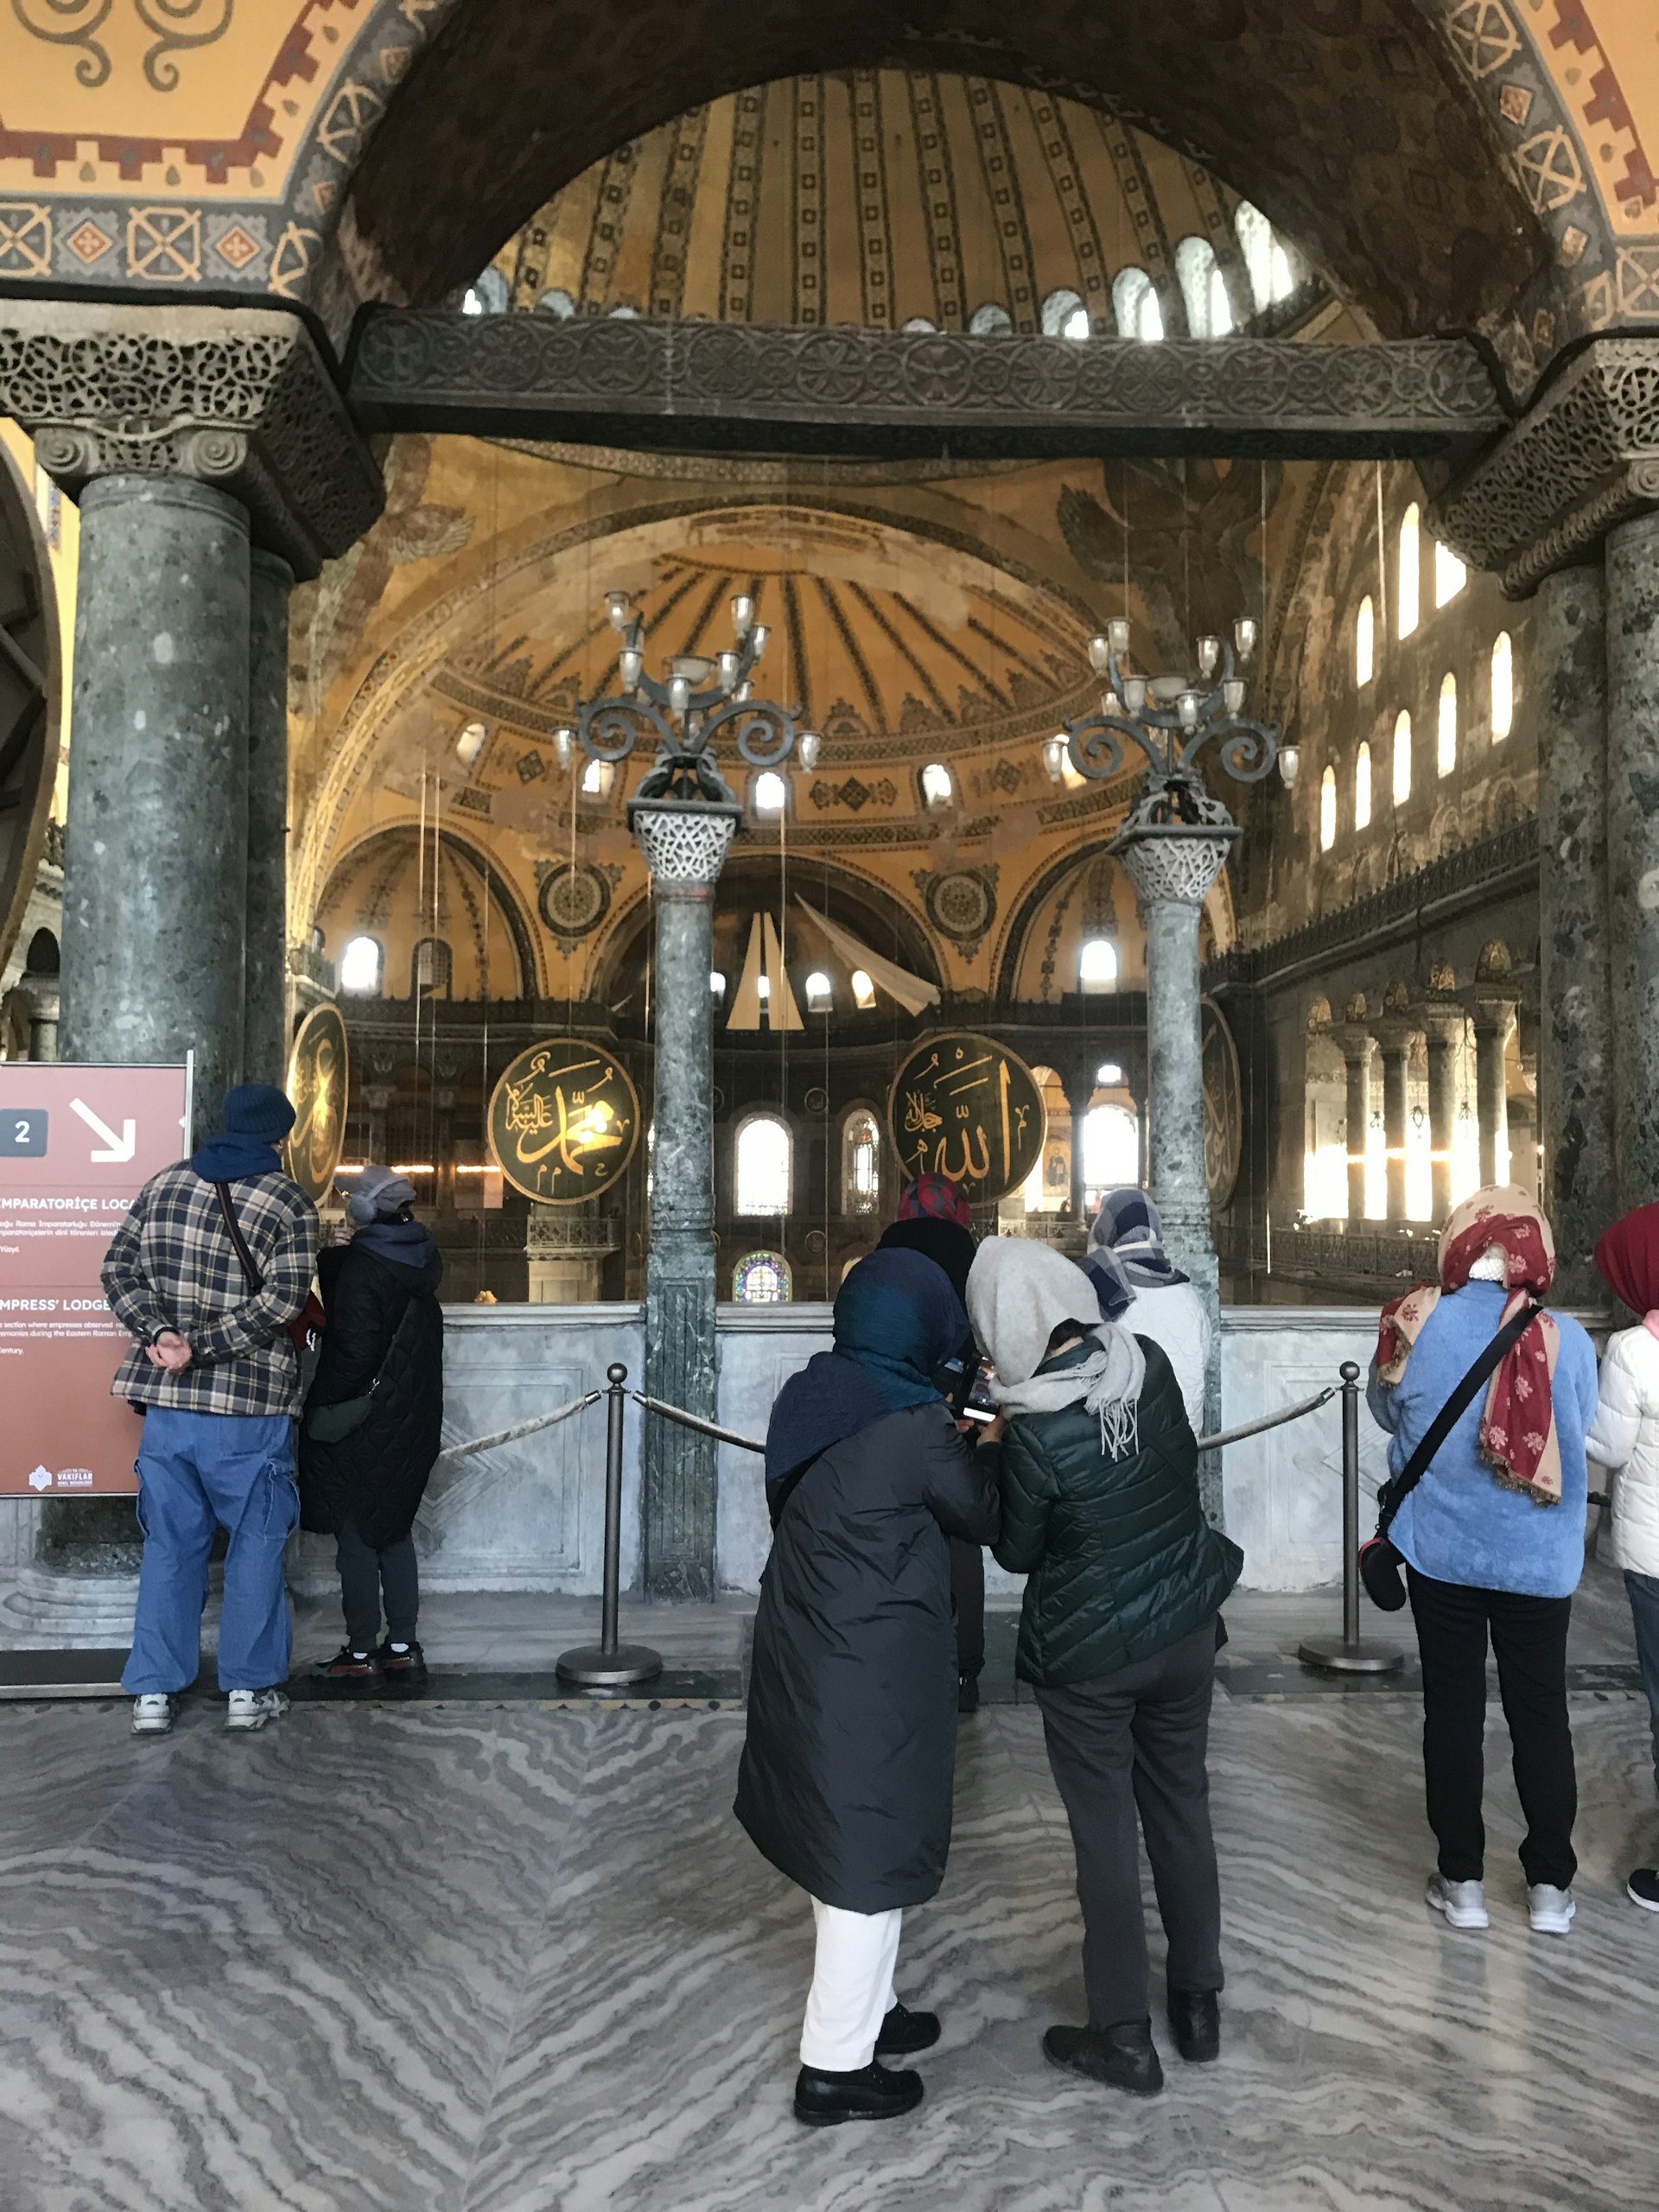  Image of the interior of Hagia Sophia where visitors are viewing the historical site. Several columns with decorative capitals and an ornate upper gallery with Islamic calligraphy are visible. Visitors are using audio guides, and the floor features a marble pattern. There's a roped-off section leading to an upper area of the mosque..jpg